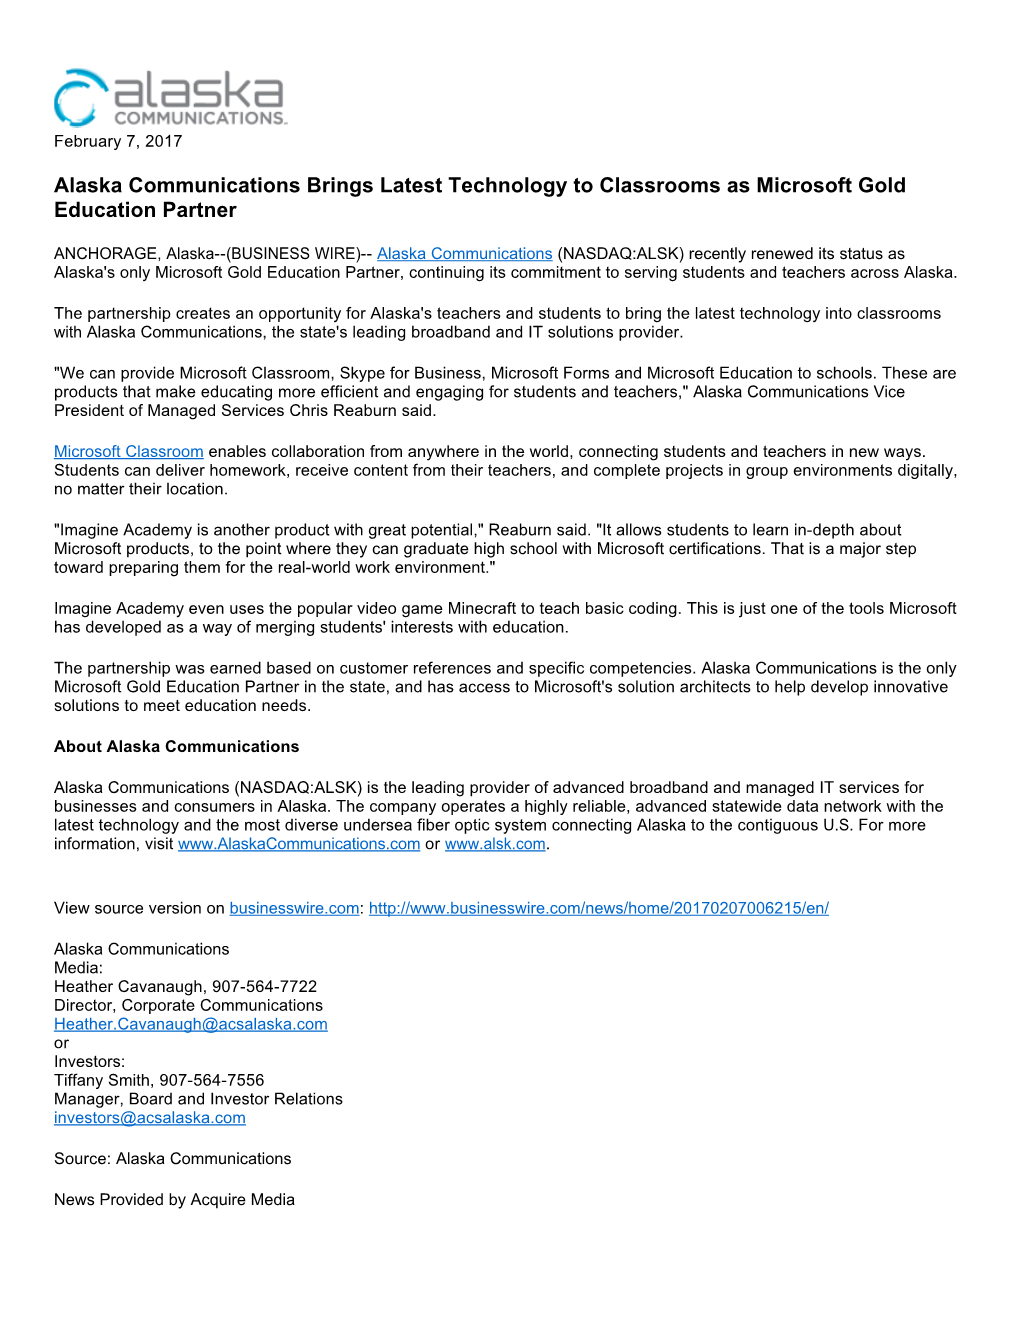 Alaska Communications Brings Latest Technology to Classrooms As Microsoft Gold Education Partner